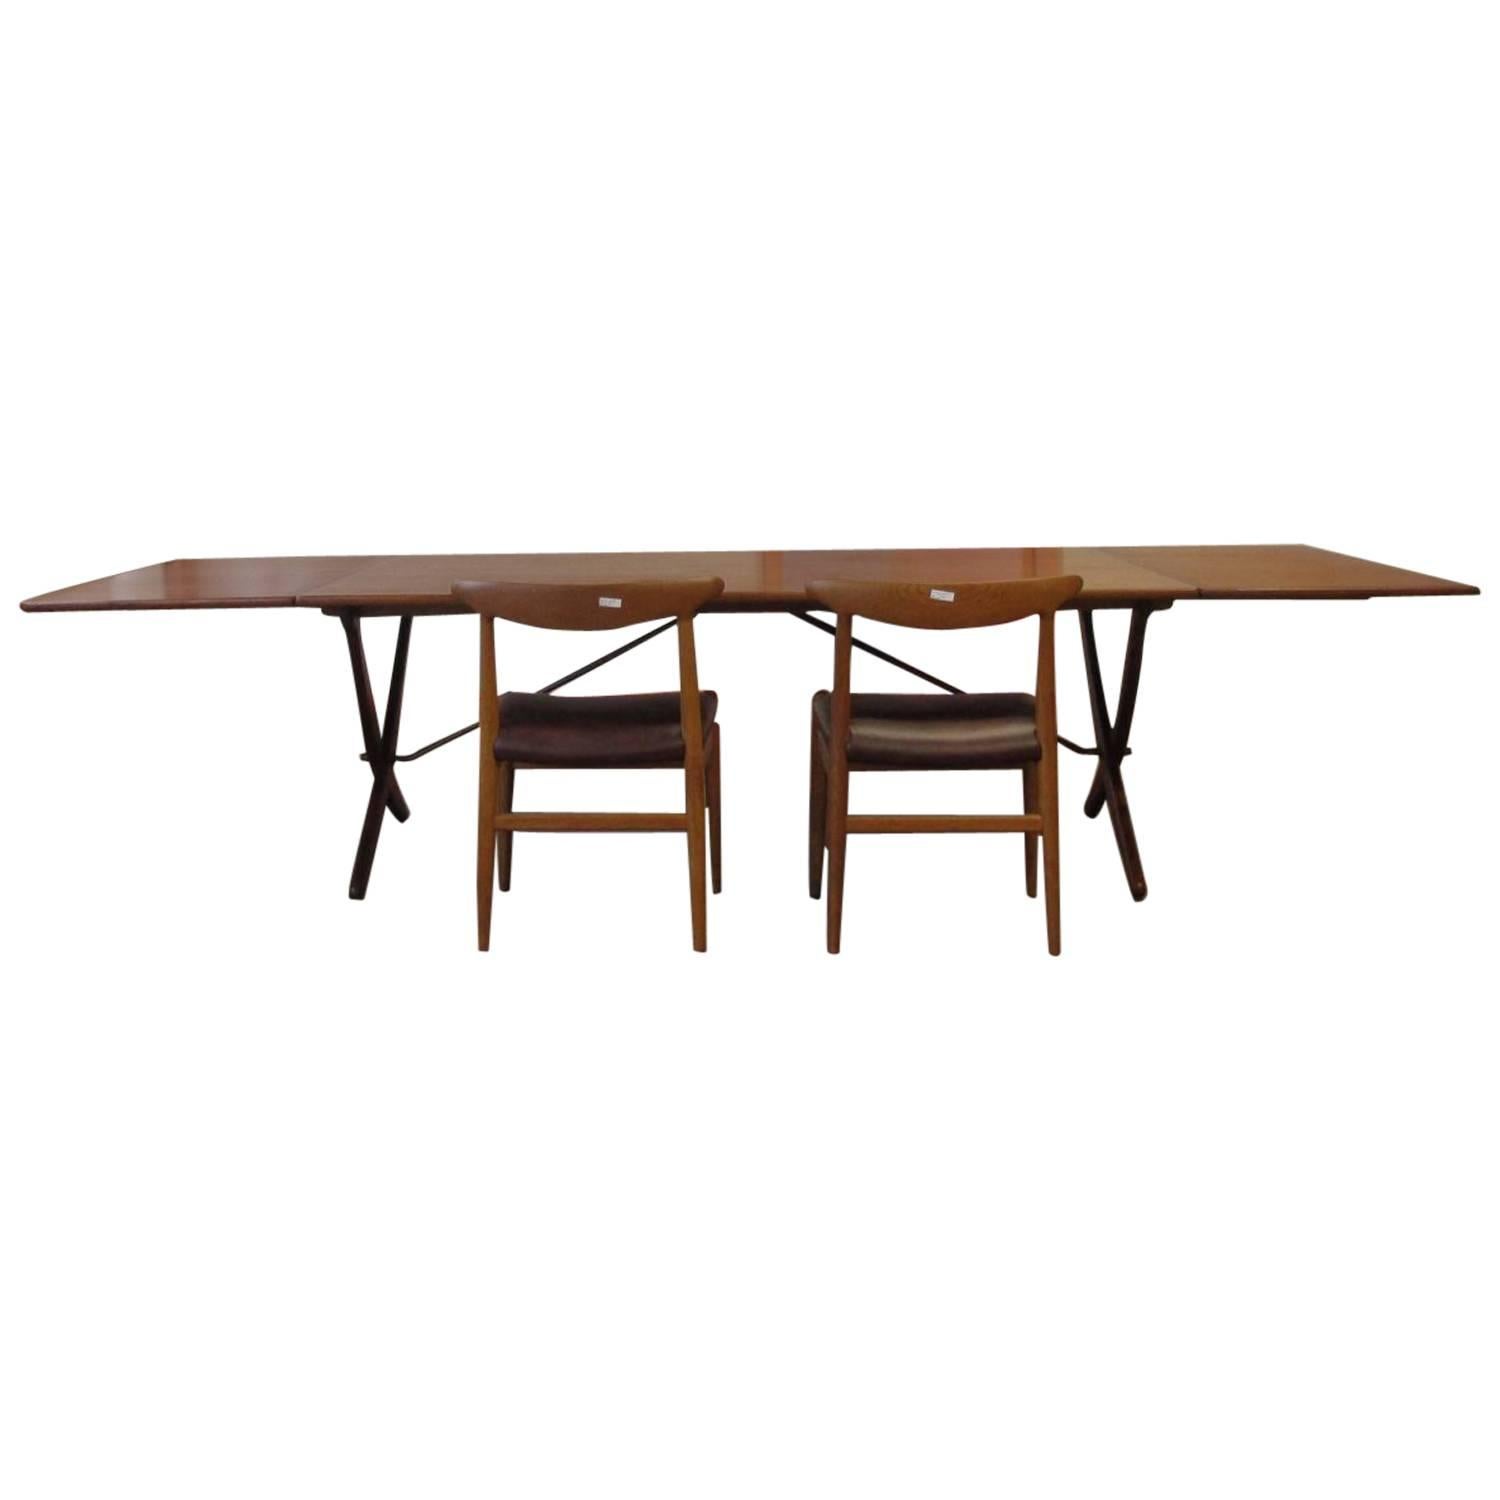 Rare Hans Wegner AT-314 Dining Table in Teak by Andreas Tuck For Sale